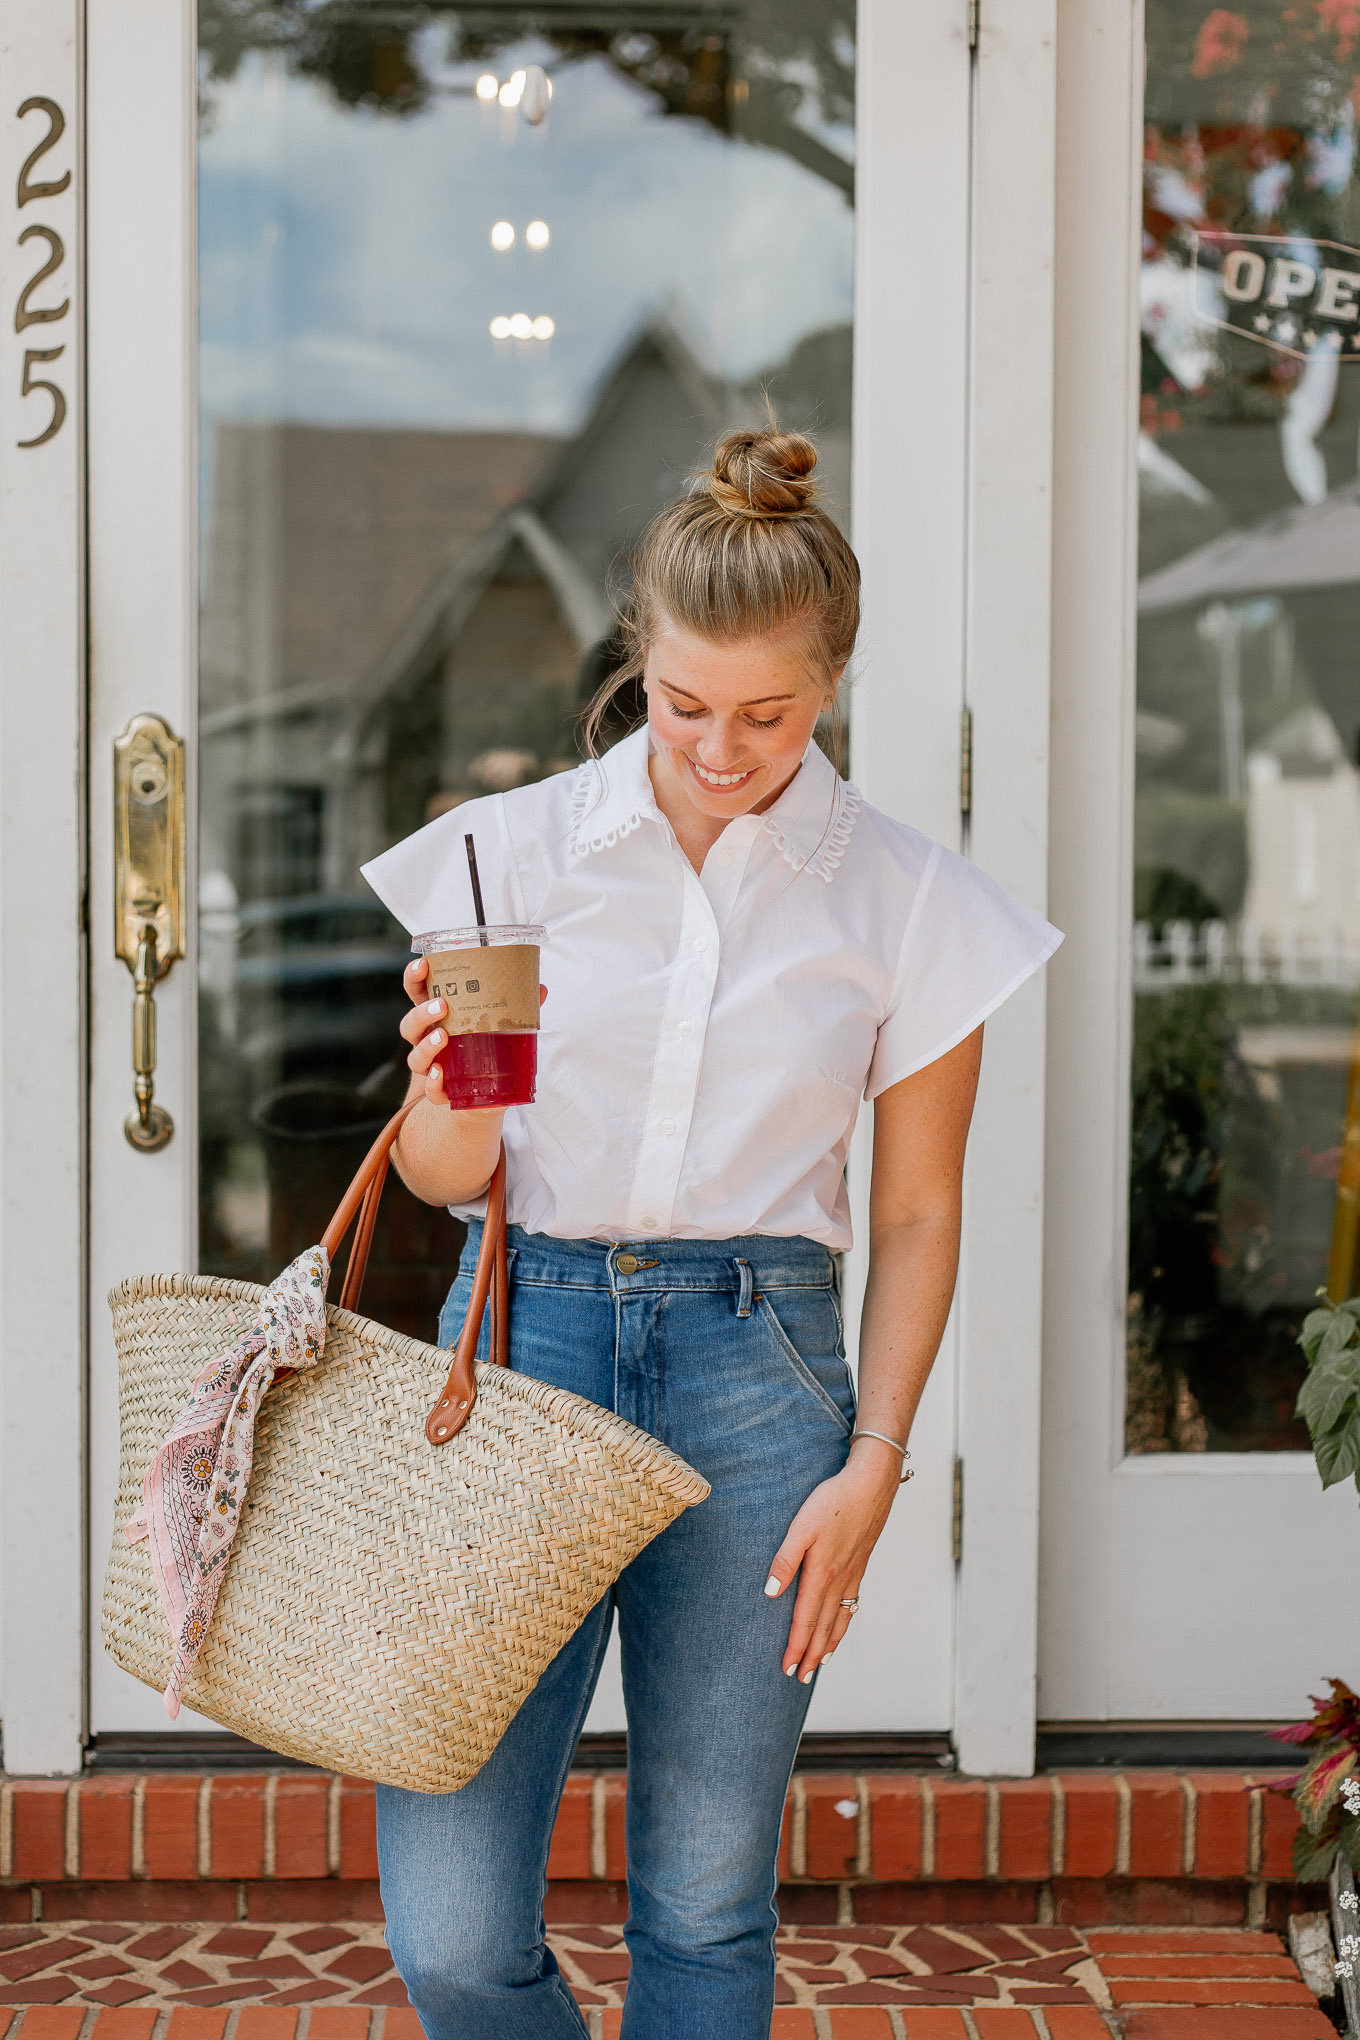 Small Businesses to Shop & Support Right Now | Local Charlotte Small Businesses | Louella Reese